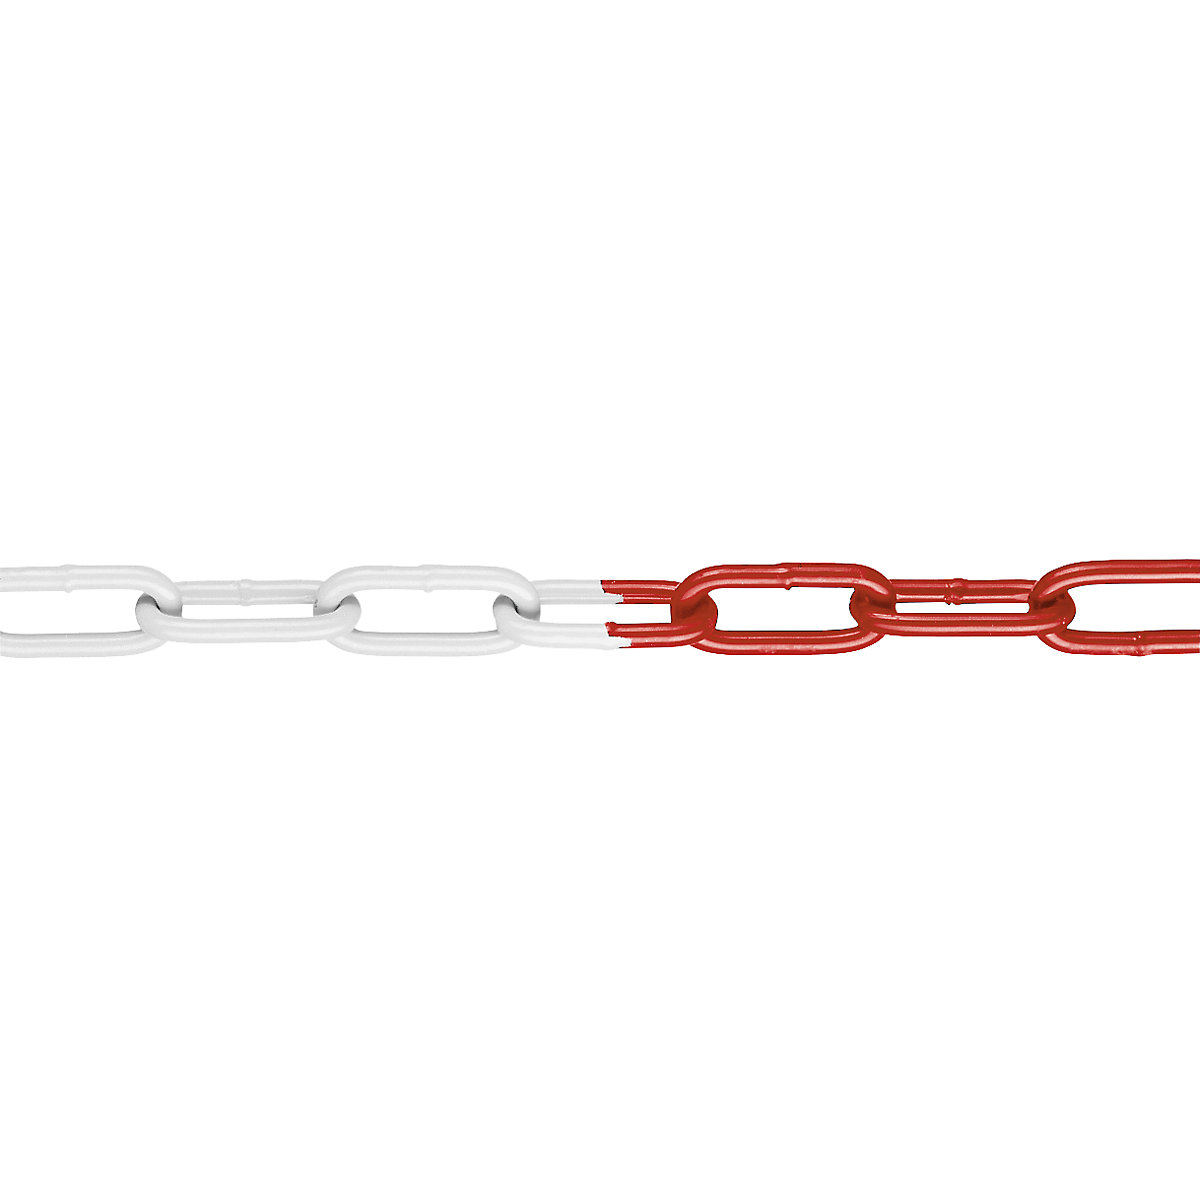 Barrier chain, made of plastic coated steel, heavy duty version, 15 m, red/white